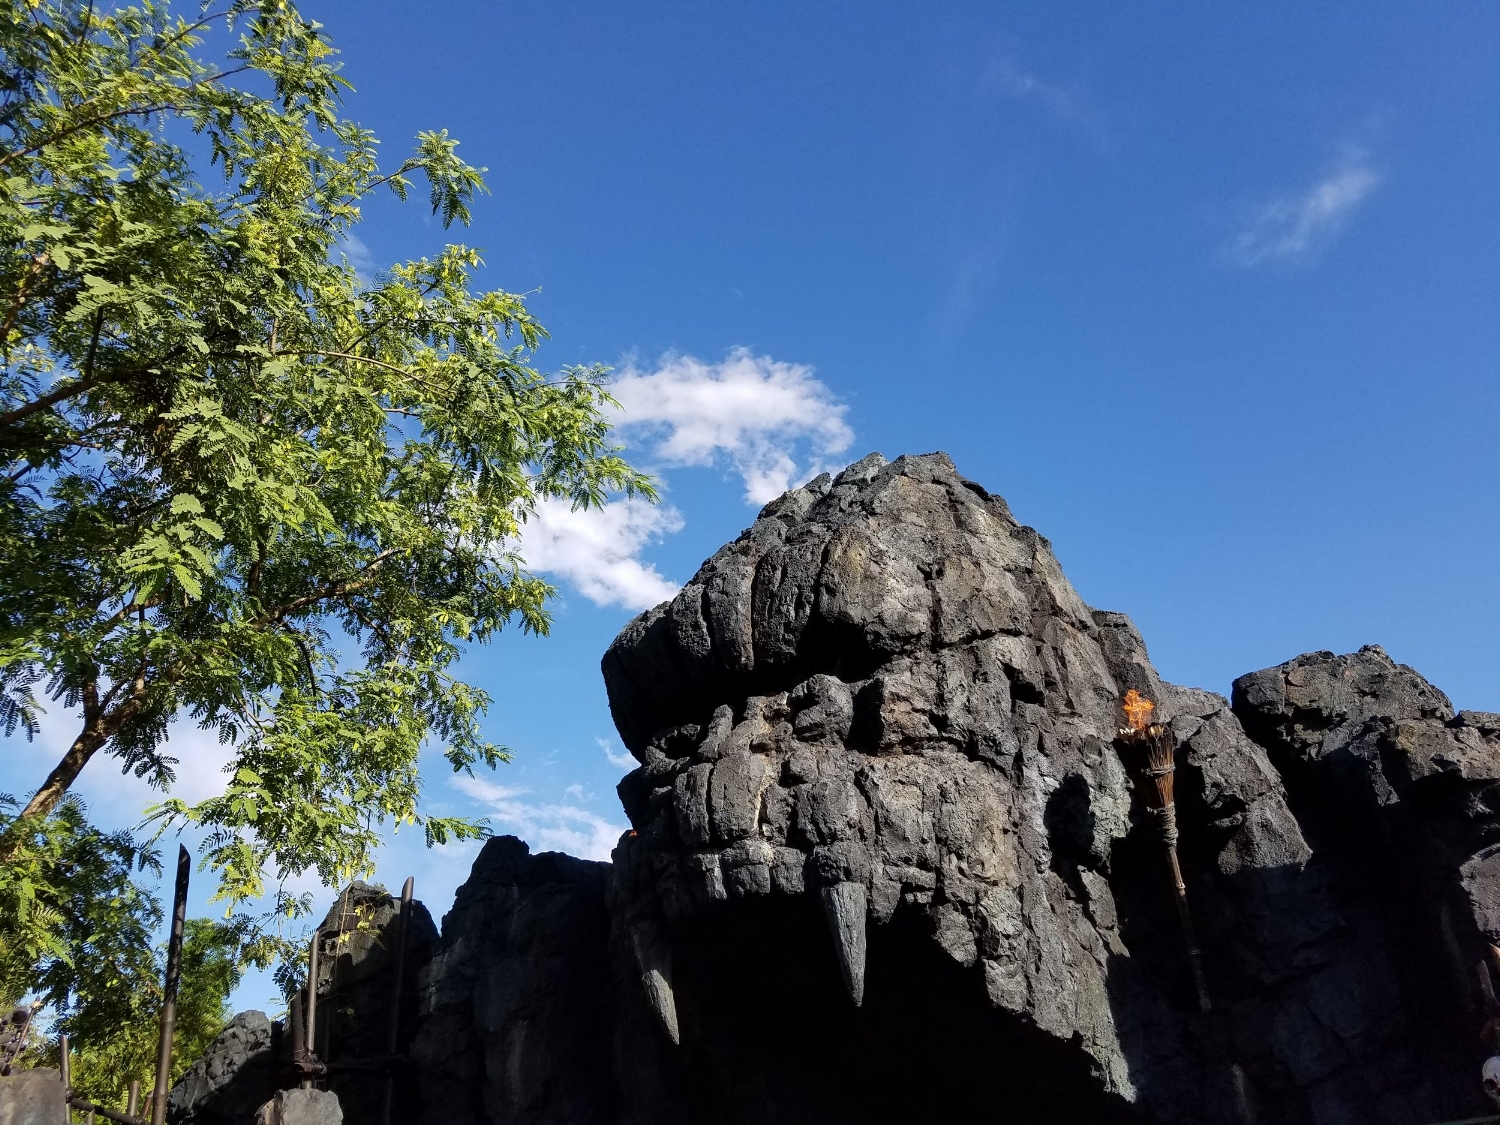 Islands of Adventure Rides, Shows, Dining, Shops, and Play Areas